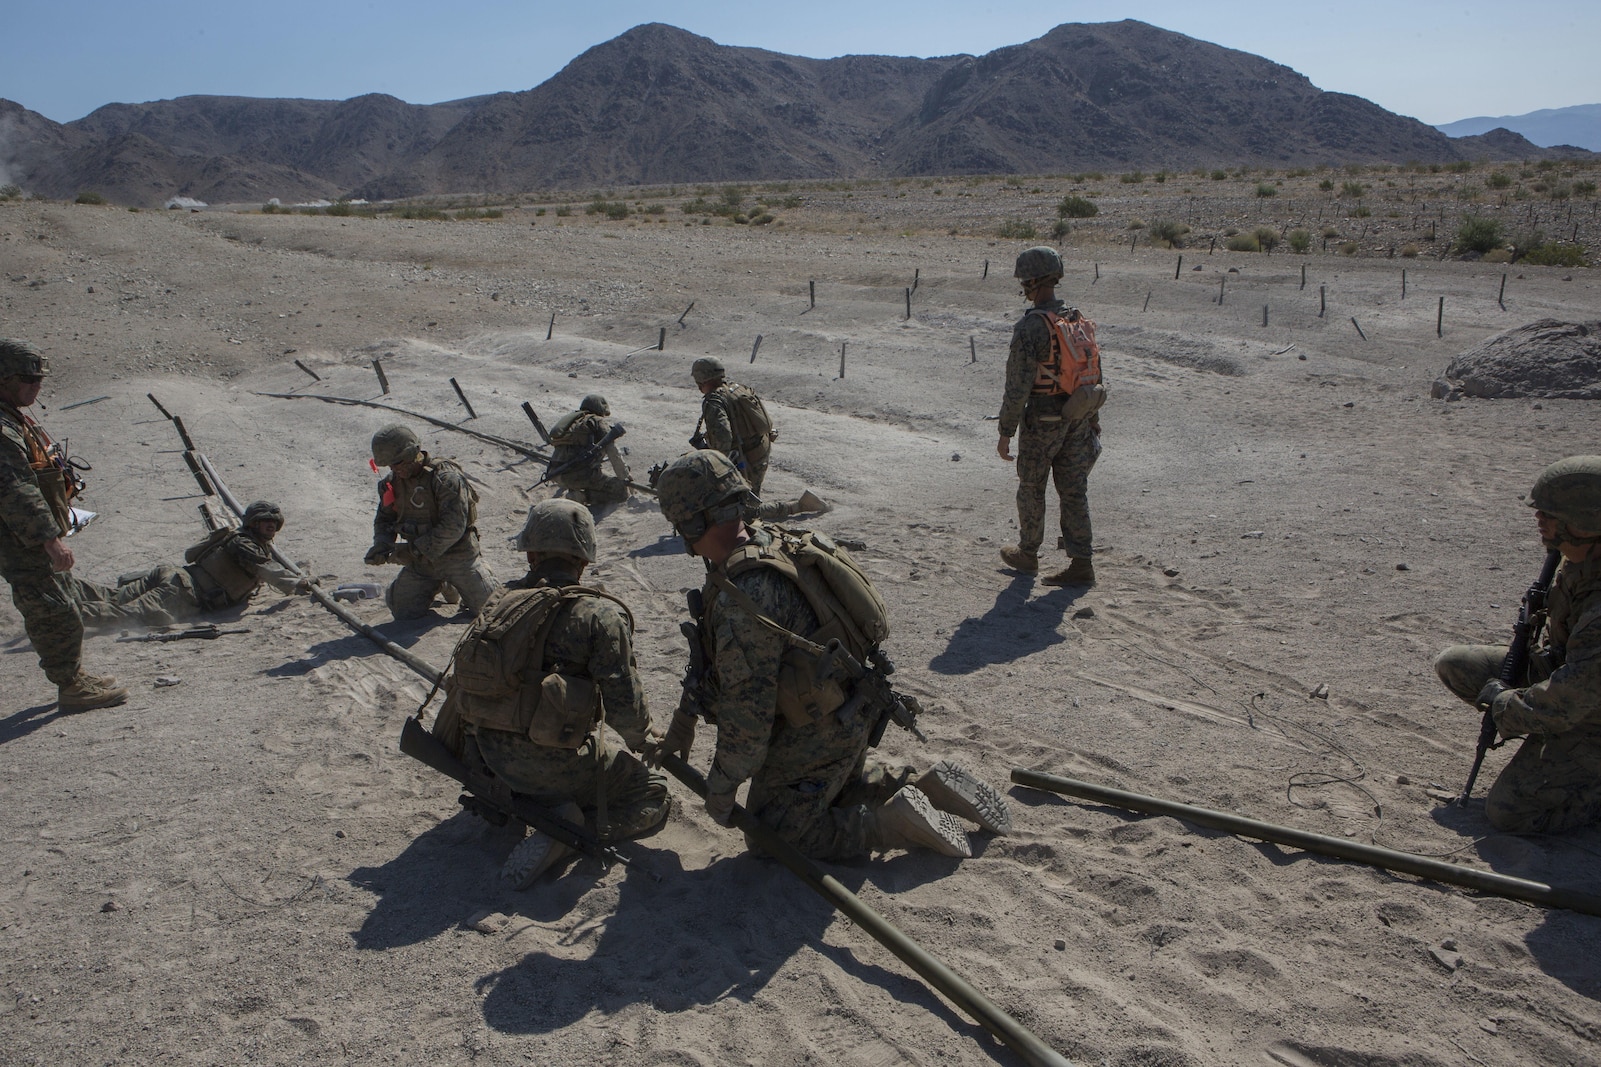 U.S. Marines with Golf Company, 2nd Battalion, 25th Marines, 4th Marine Division, Marine Forces Reserve, engineer a bangalore torpedo on range 400 as part of Integrated Training Exercise 4-17 at Camp Wilson, Twentynine Palms, California on June 18, 2017. ITX 4-17 is a live-fire and maneuver combined arms exercise designed to train battalion and squadron-sized units in the tactics, techniques, and procedures required to provide a sustainable and ready operational reserve for employment across the full spectrum of crisis and global engagement.